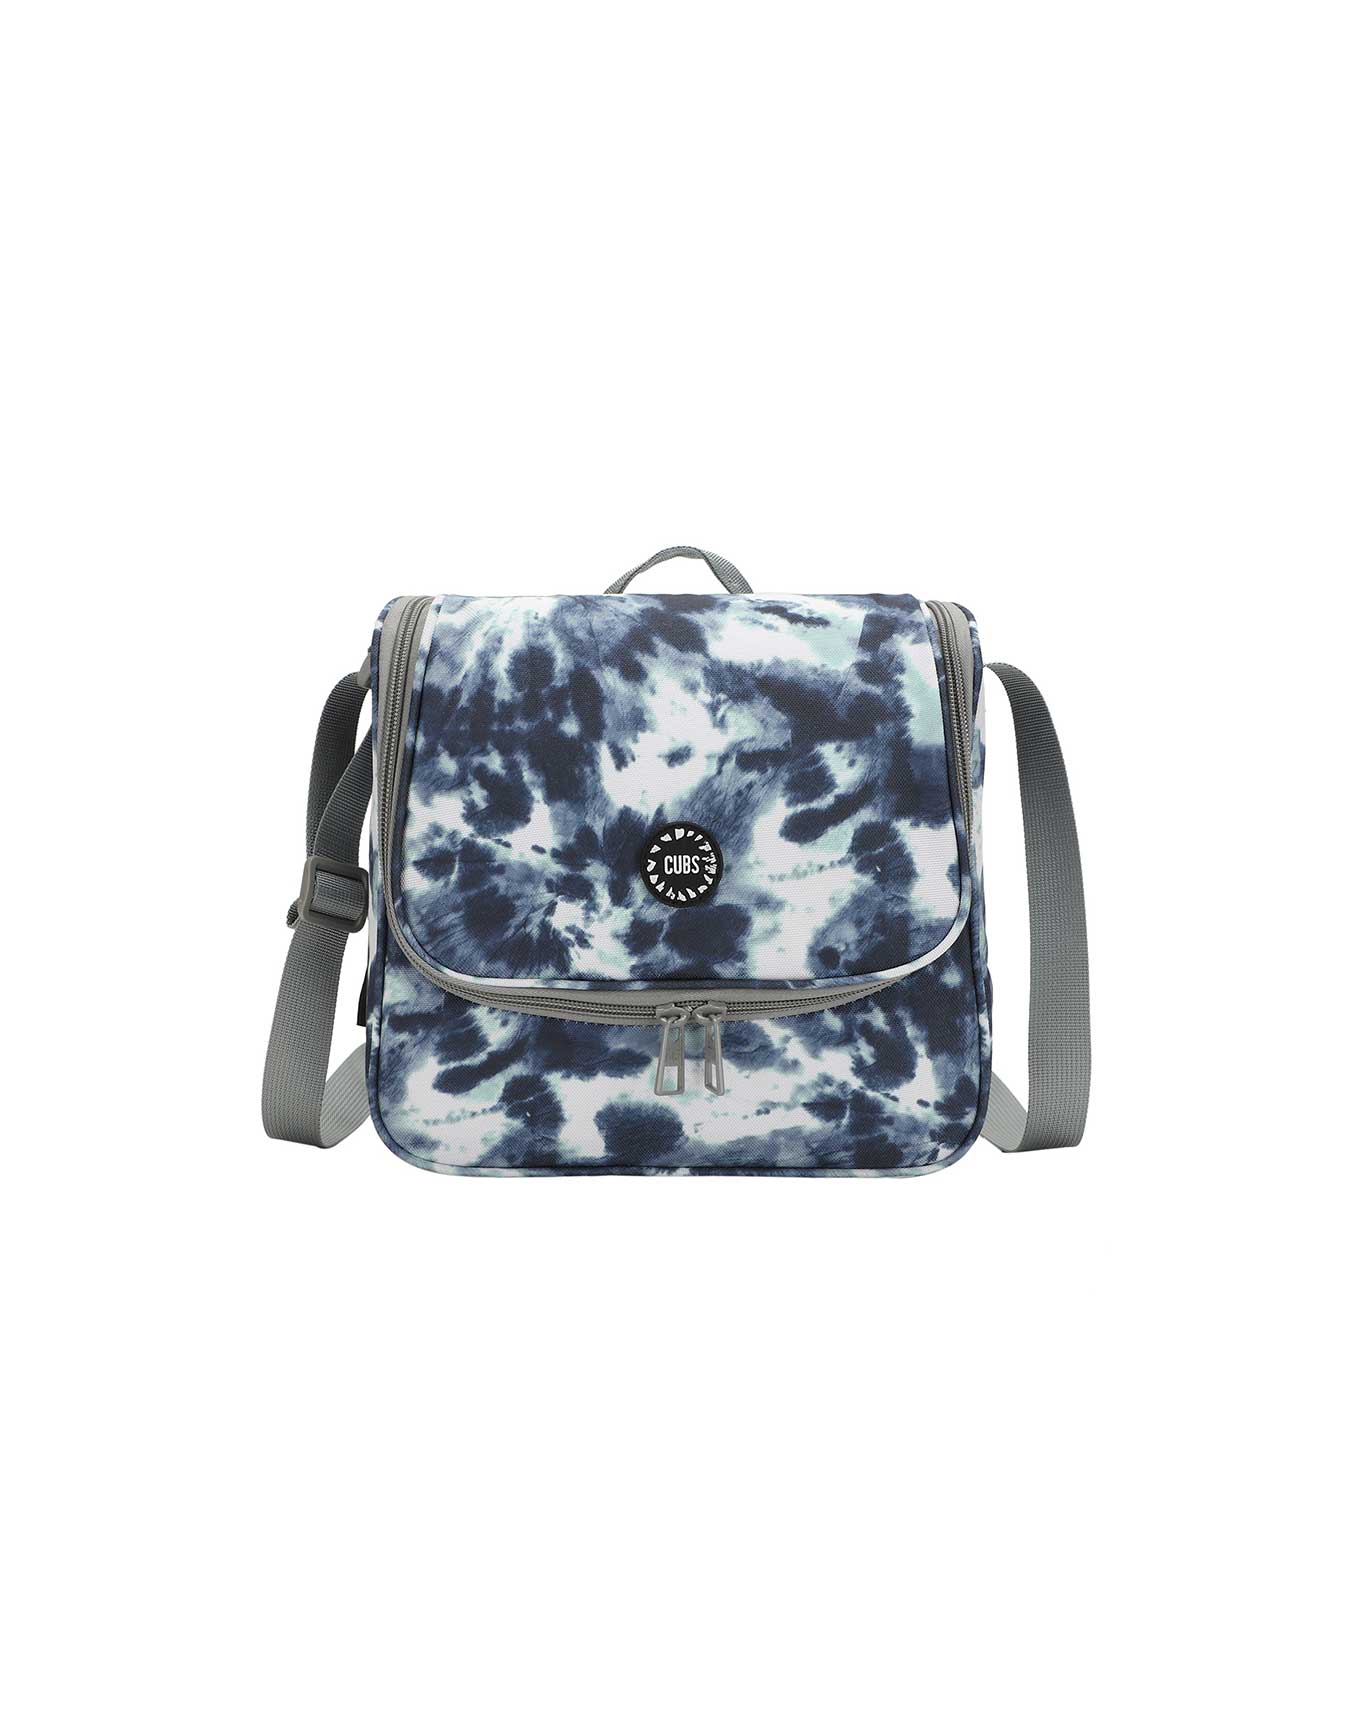 Cross Body Lunch Bag - Black And White Tie Dye